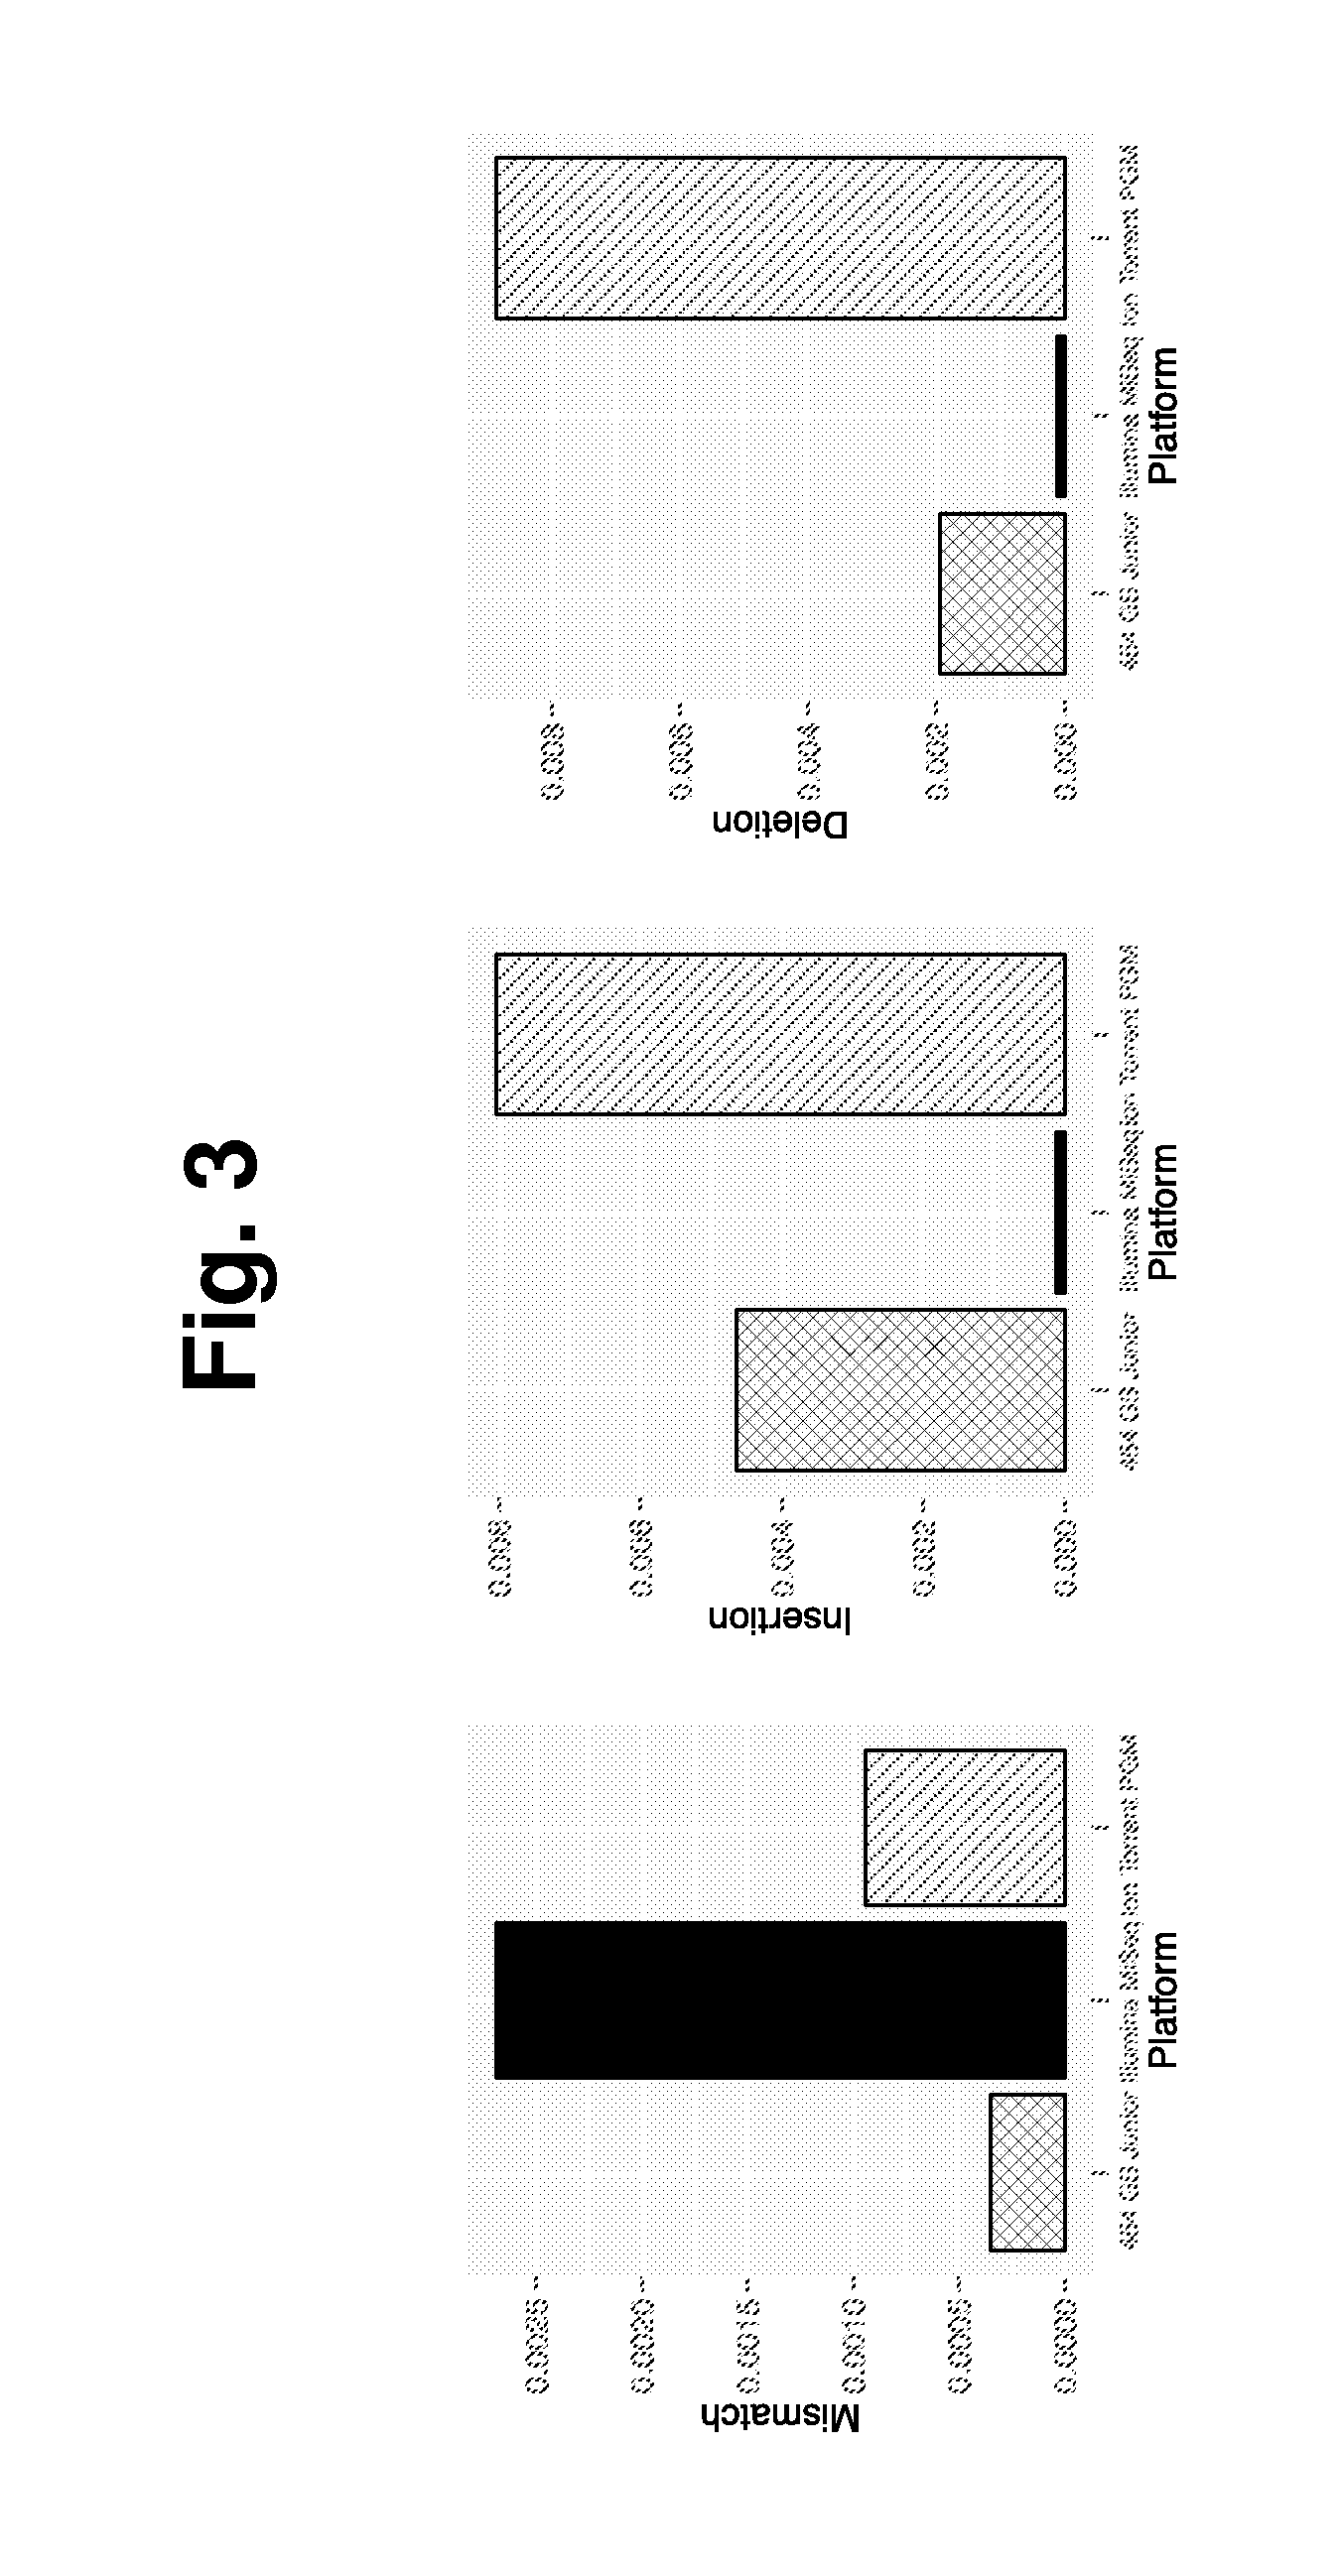 Method for increasing accuracy in quantitative detection of polynucleotides